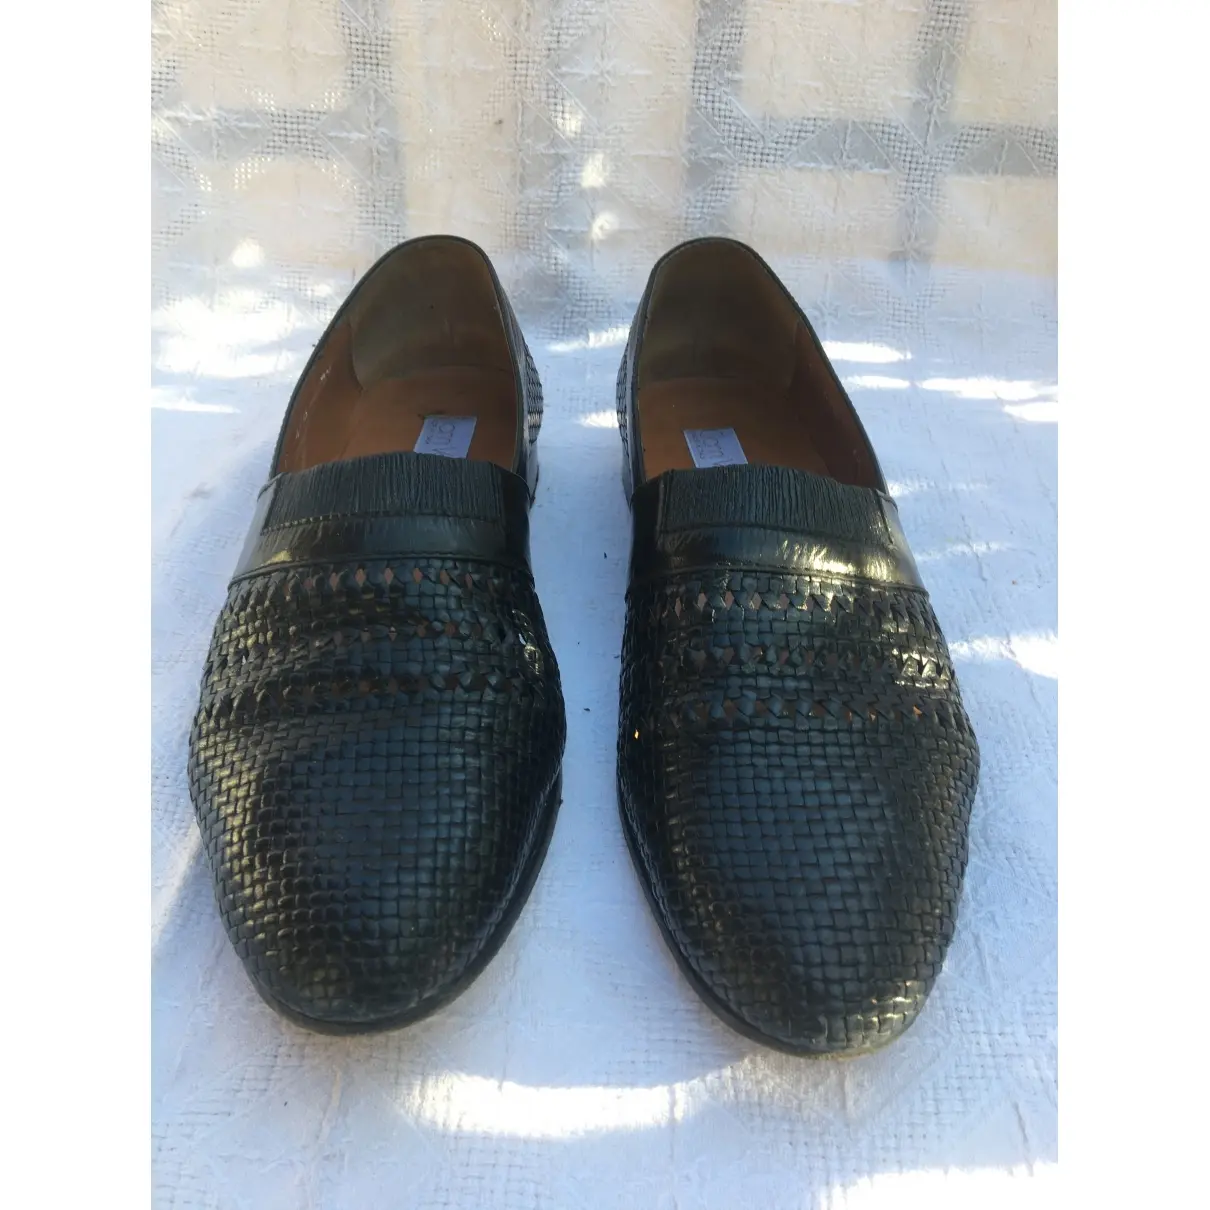 Gianni Versace Leather flats for sale - Vintage